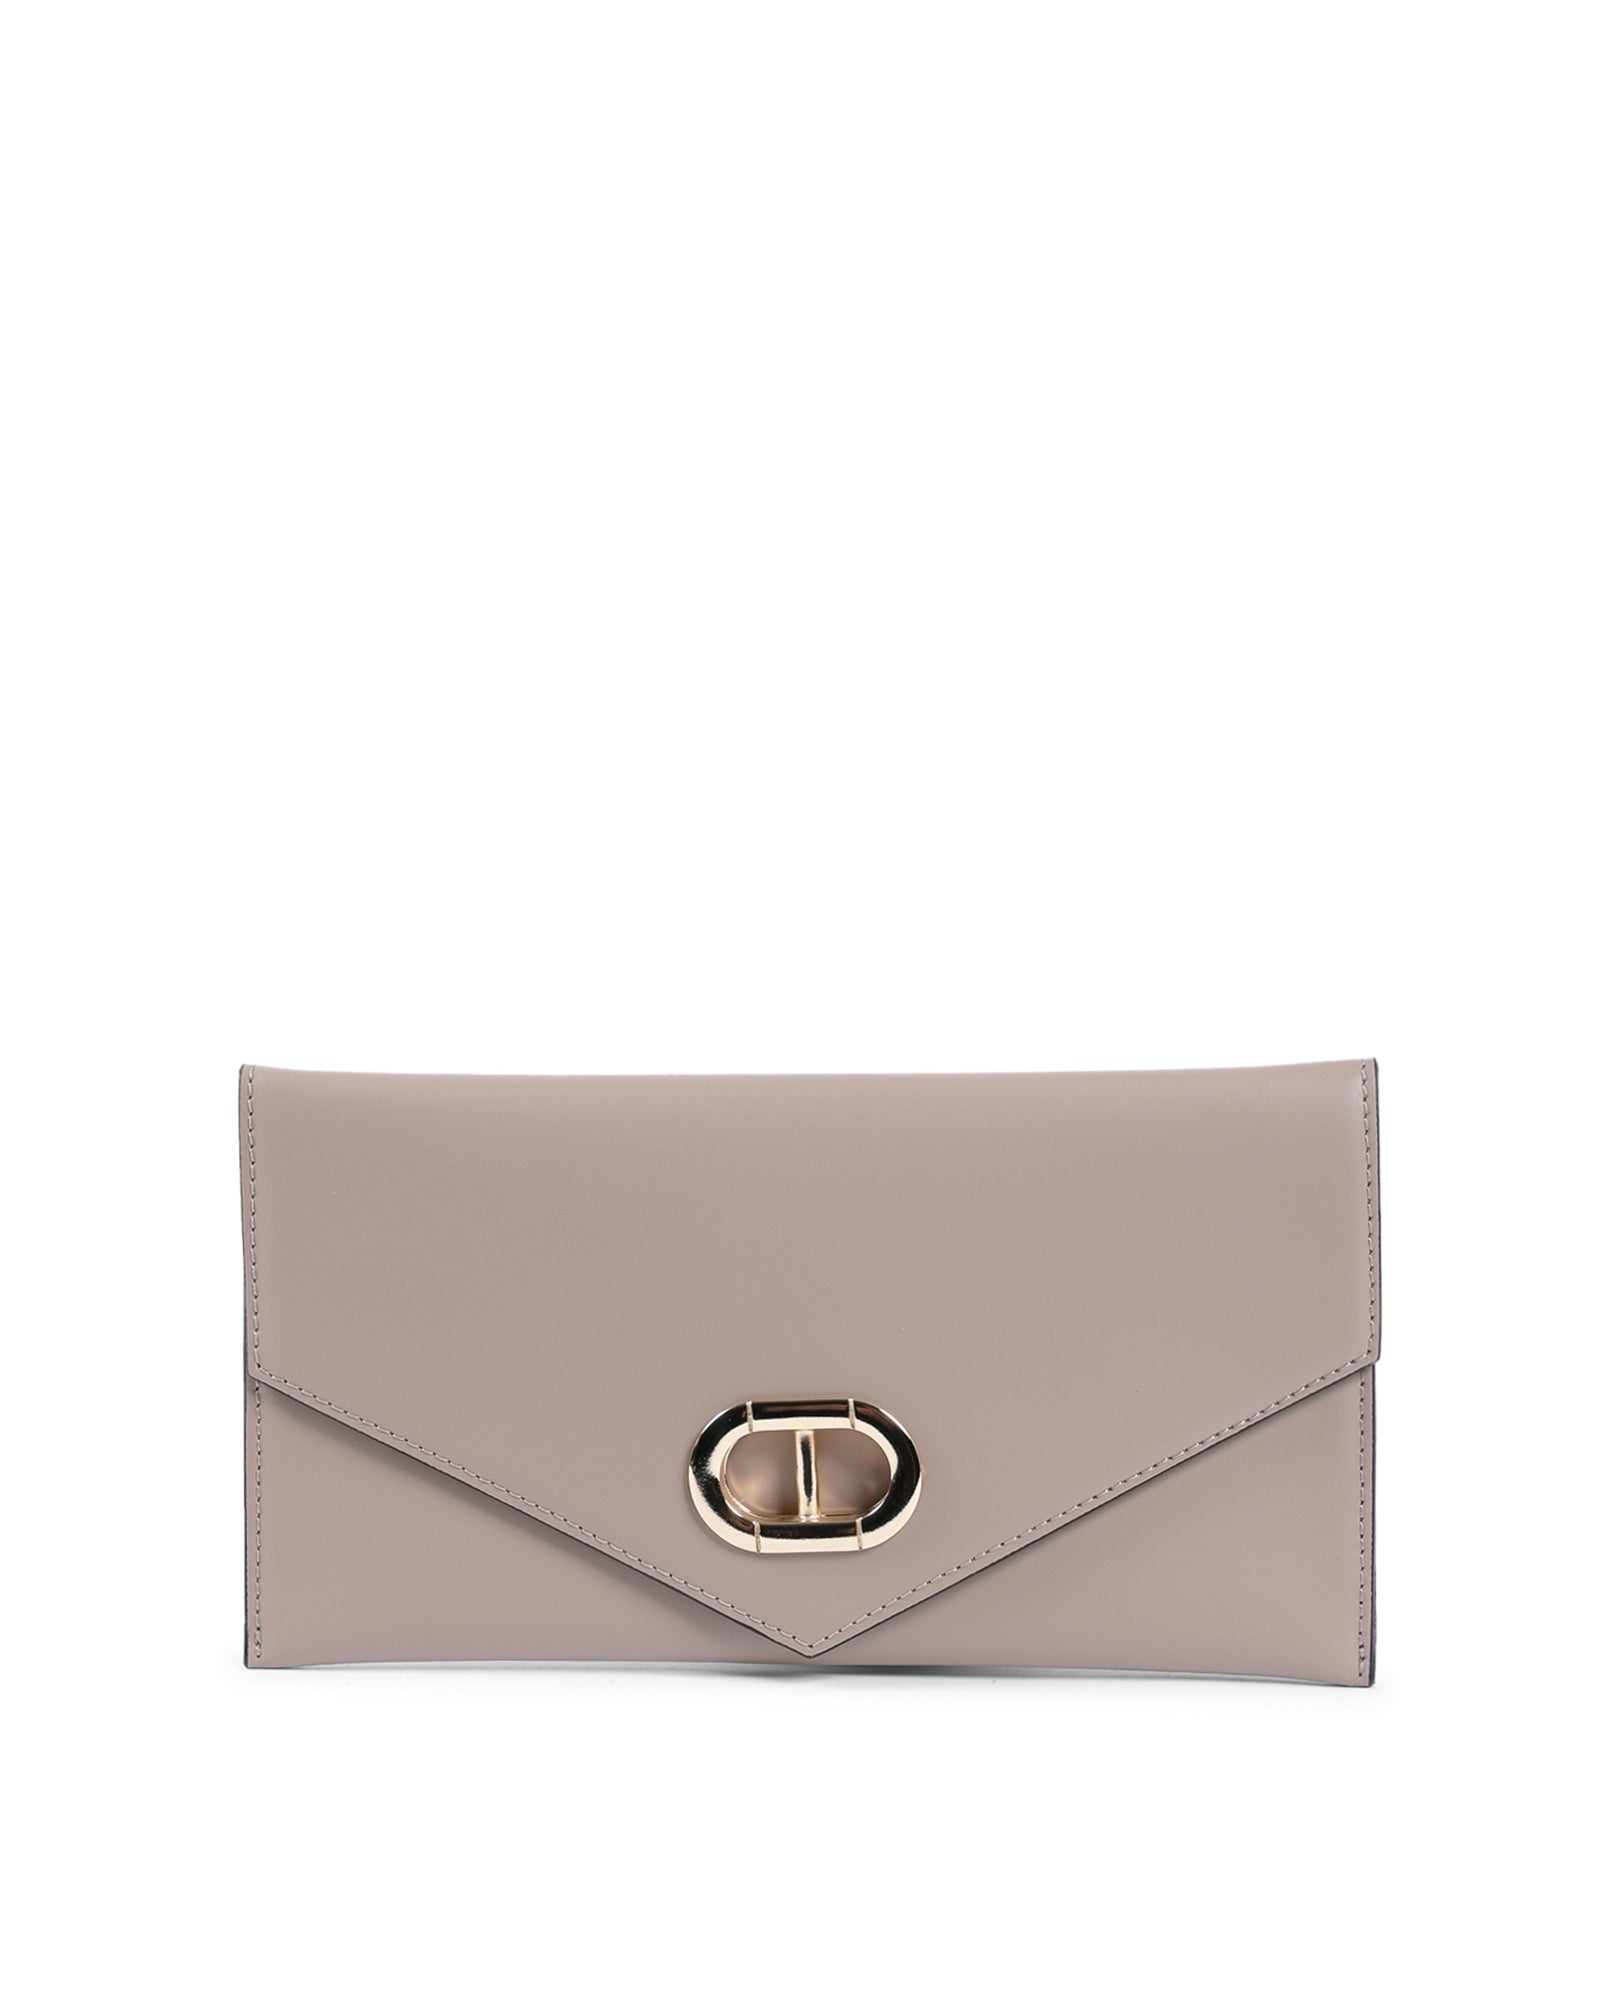 Leather Envelope Clutch Nude